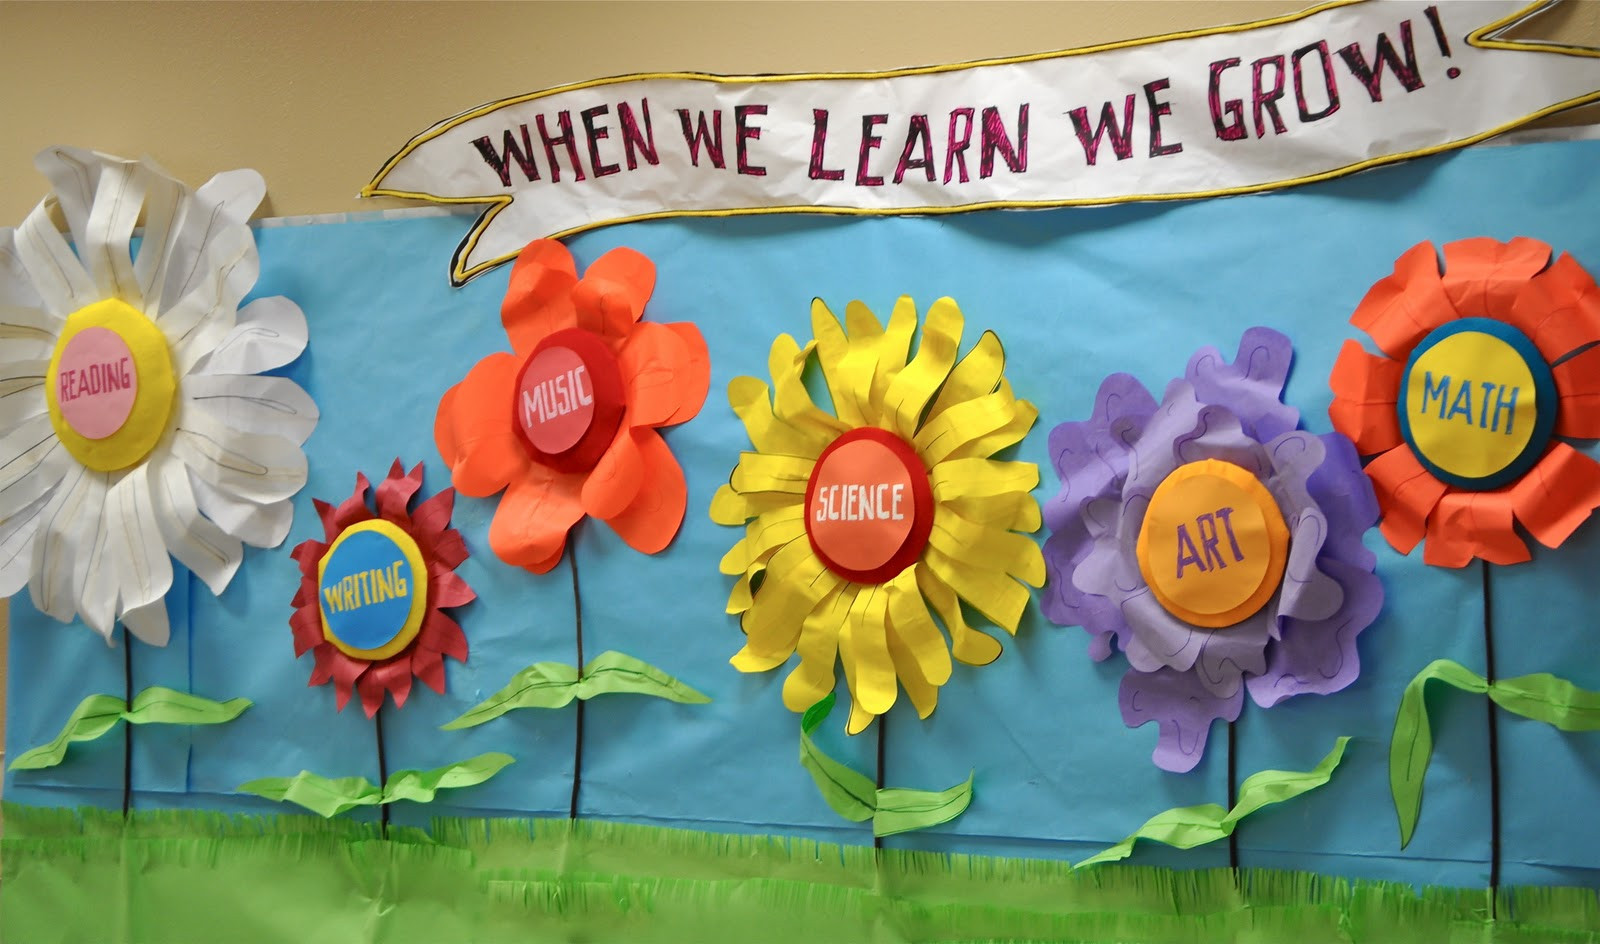 Spring Ideas For School
 ewe hooo When we learn we grow — Fun with Flowers at